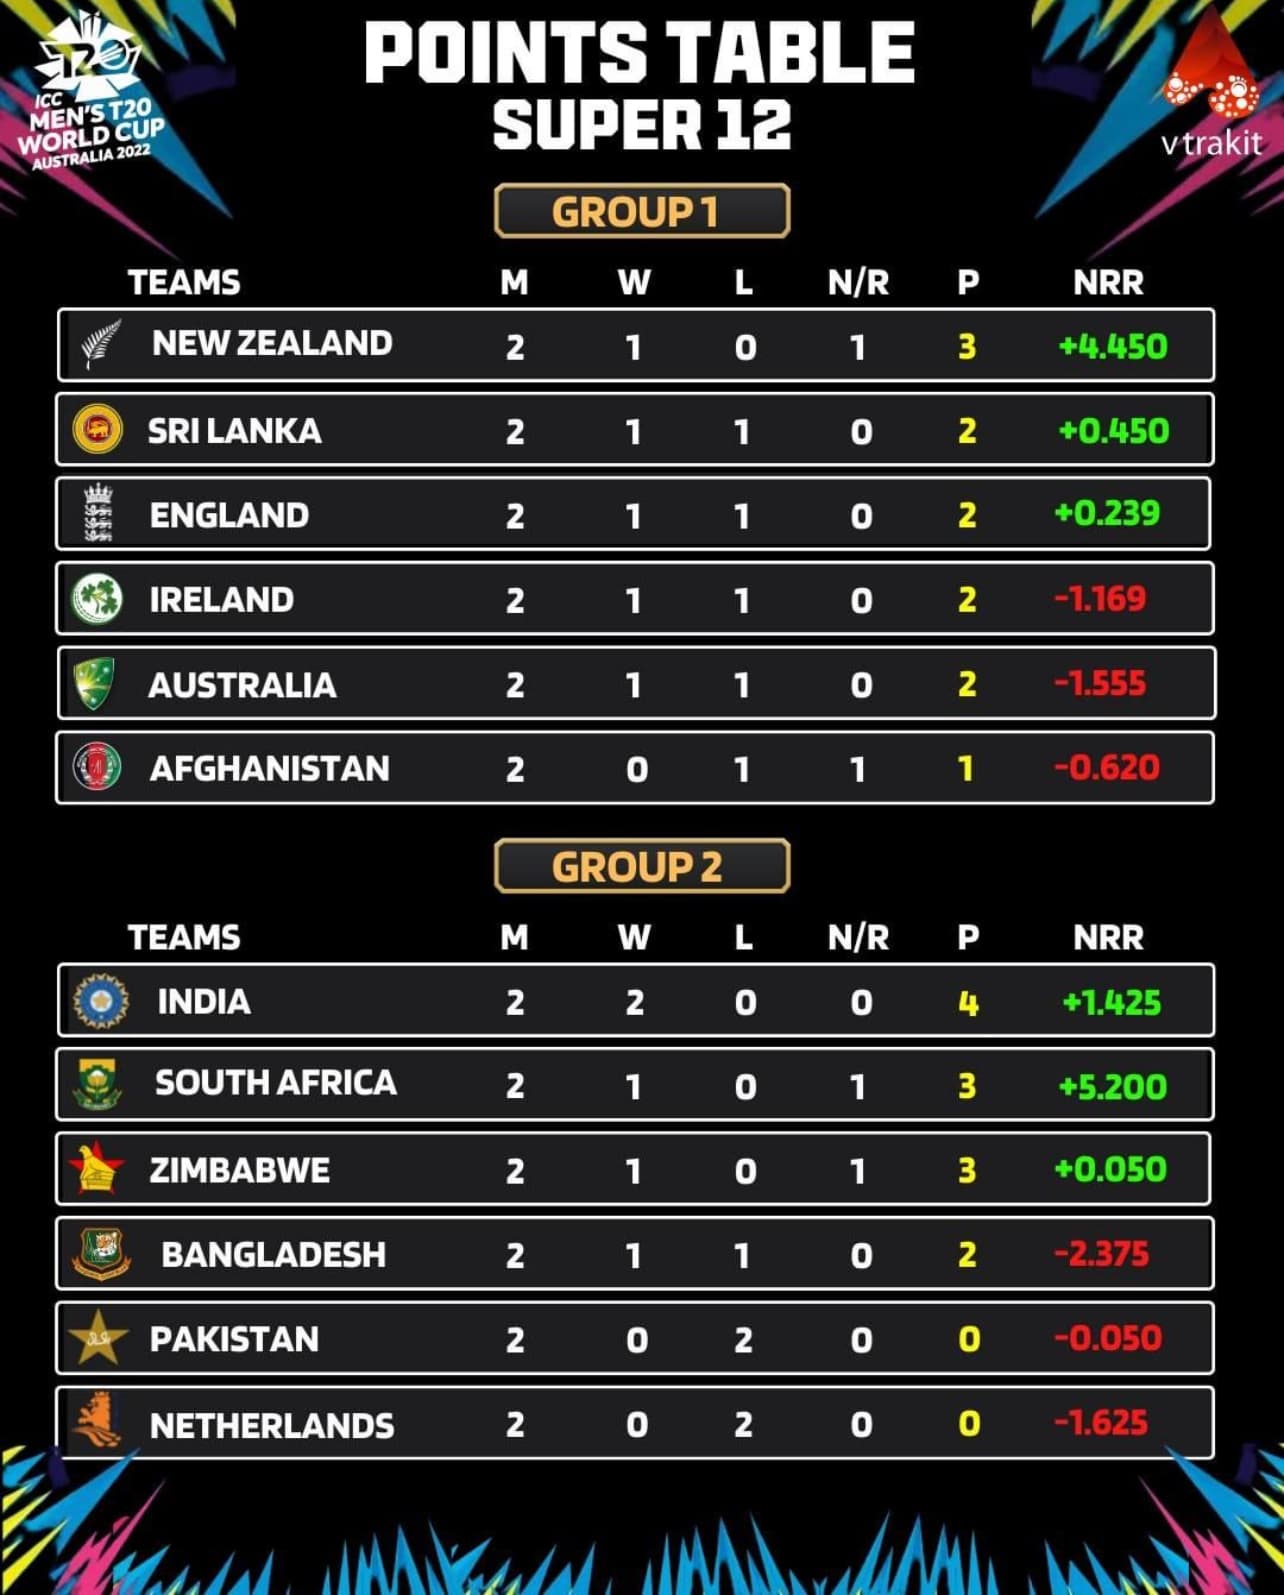 T20 World Cup 2022 - Super 12 Points Table - Updated - Cricket - Vtrakit  Community